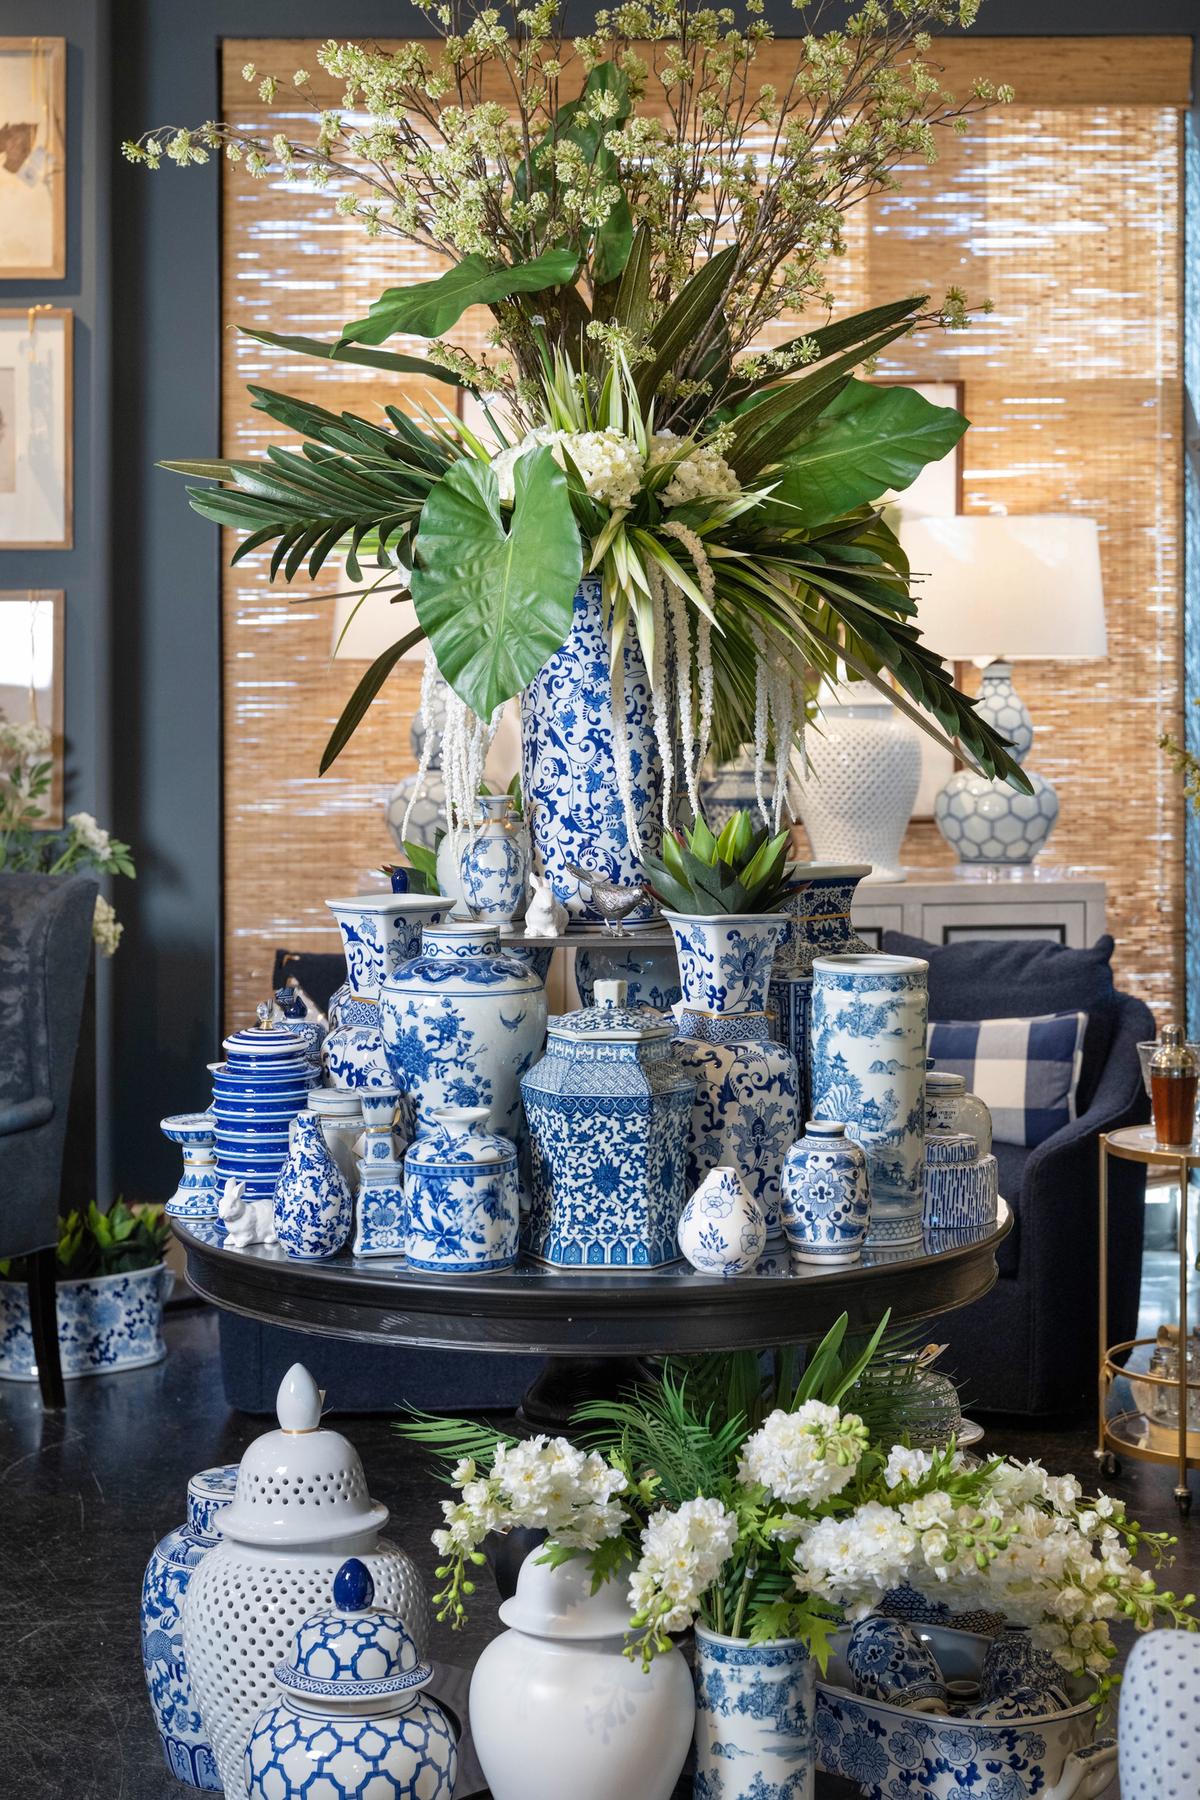 In this display, tulips, hydrangeas and drooping floral stems are the monochromatic base from which tropical greenery bursts. Monstera leaves and spiky palm fronds are mixed throughout, providing visual interest on all sides of the piece. (Handout/TNS)